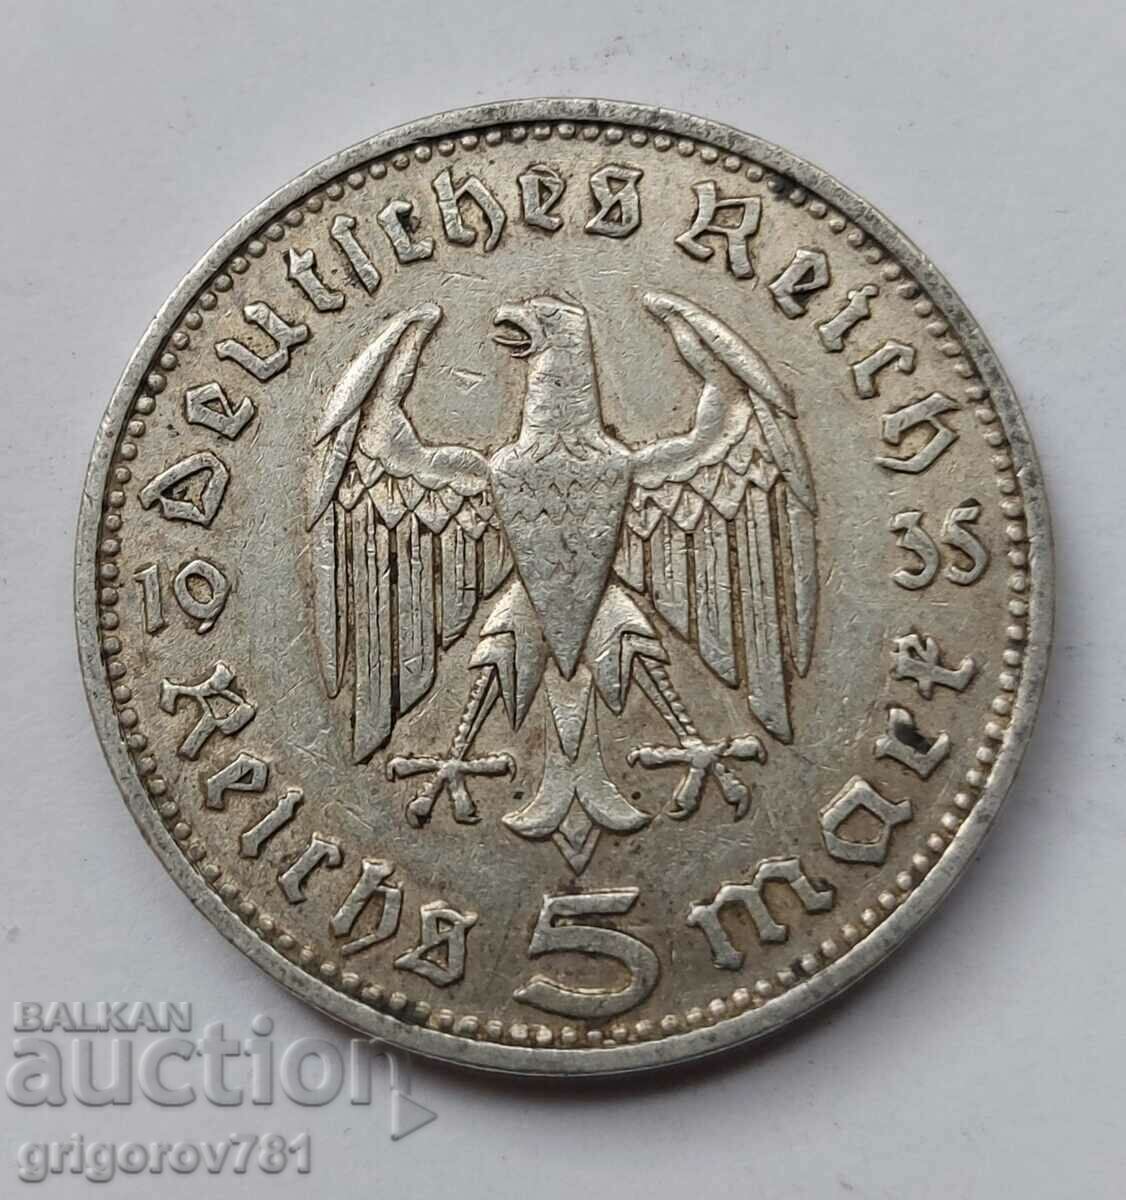 5 Mark Silver Germany 1935 D III Reich Silver Coin #60